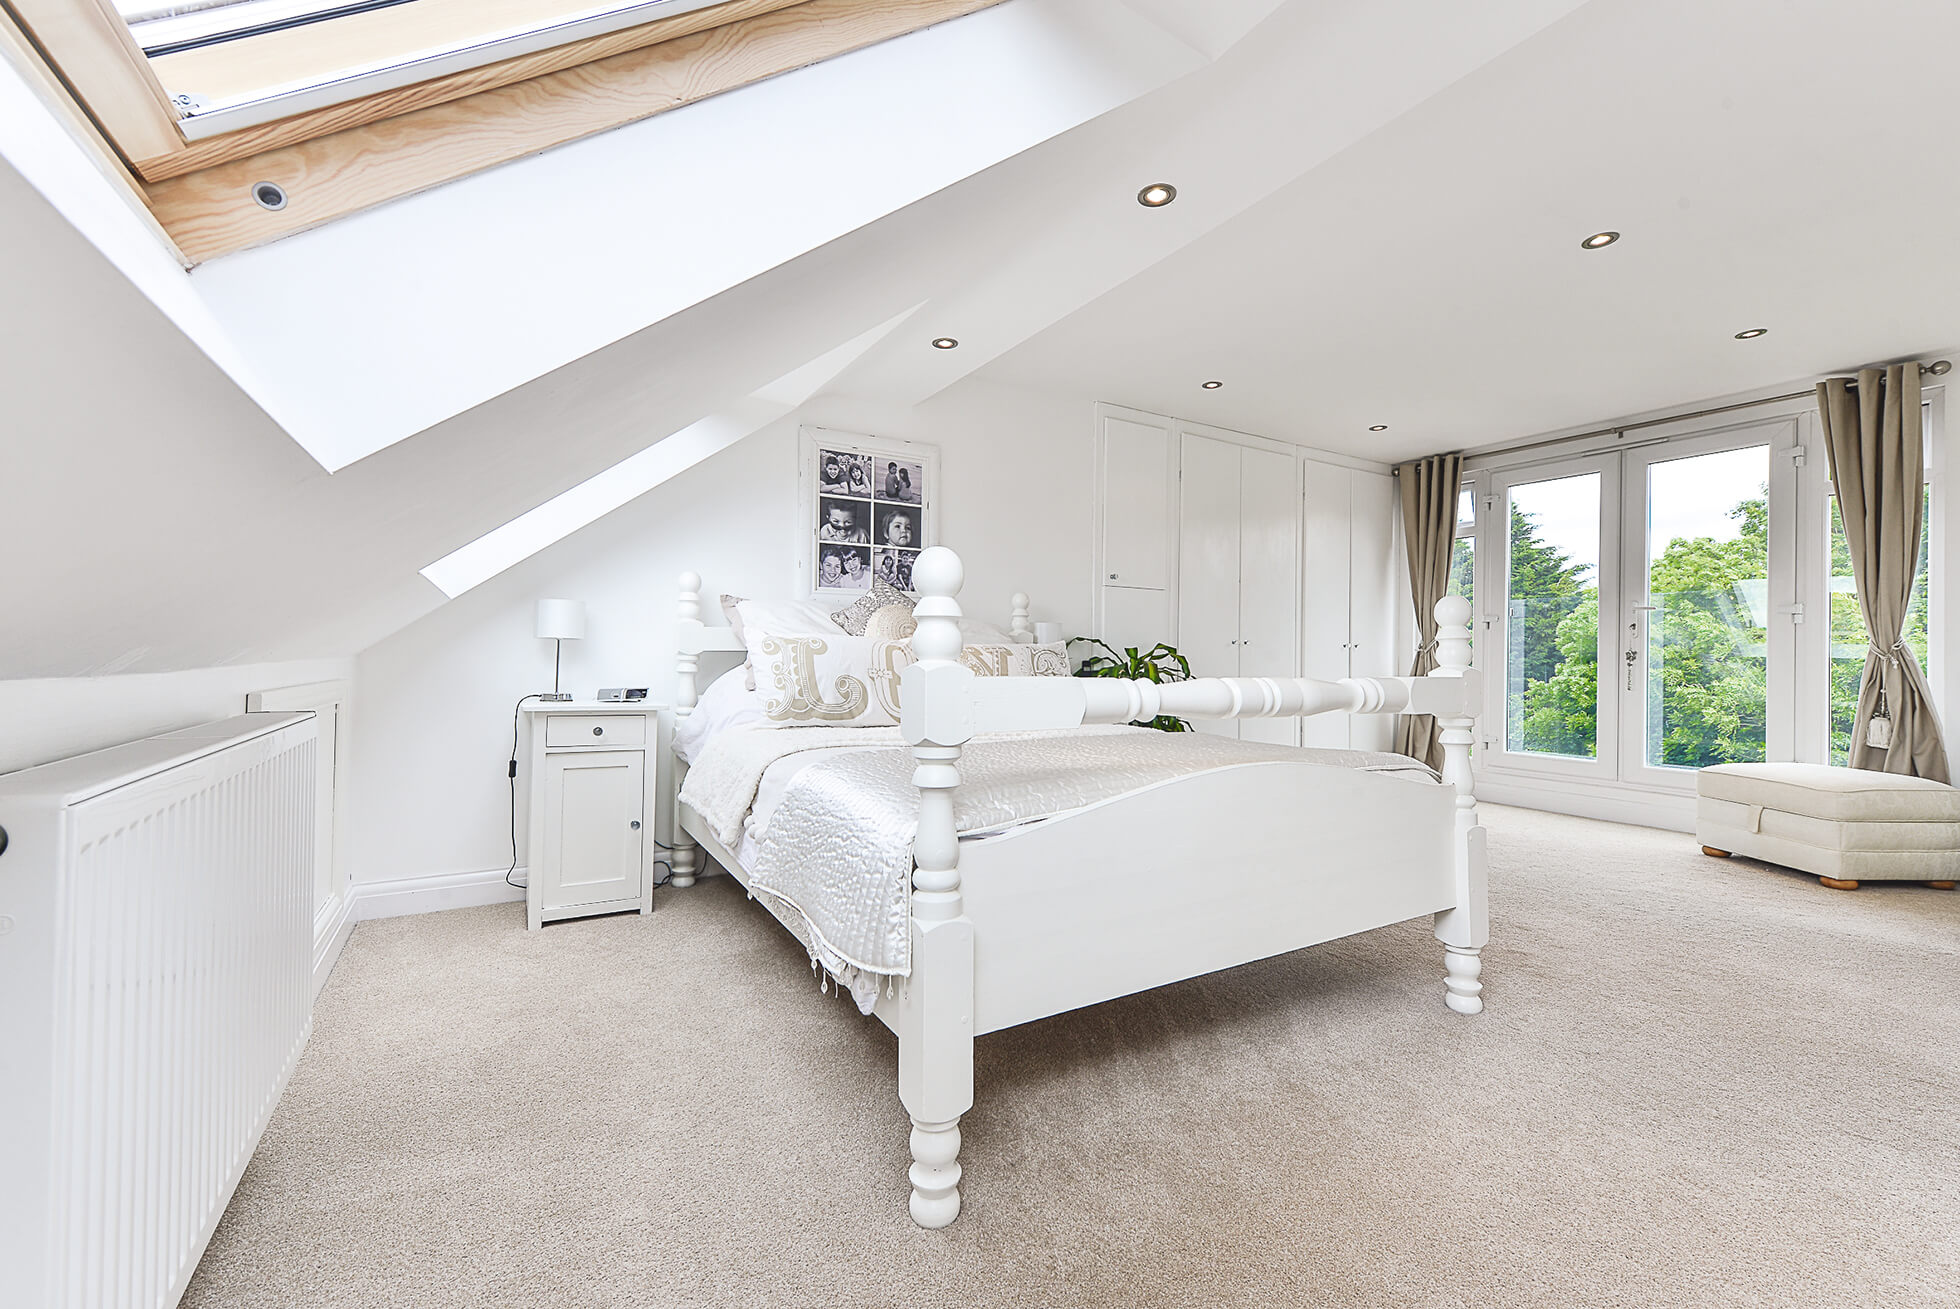 Do you have a question about converting your Loft in Benington? Here are the most popular questions asked by our clients.